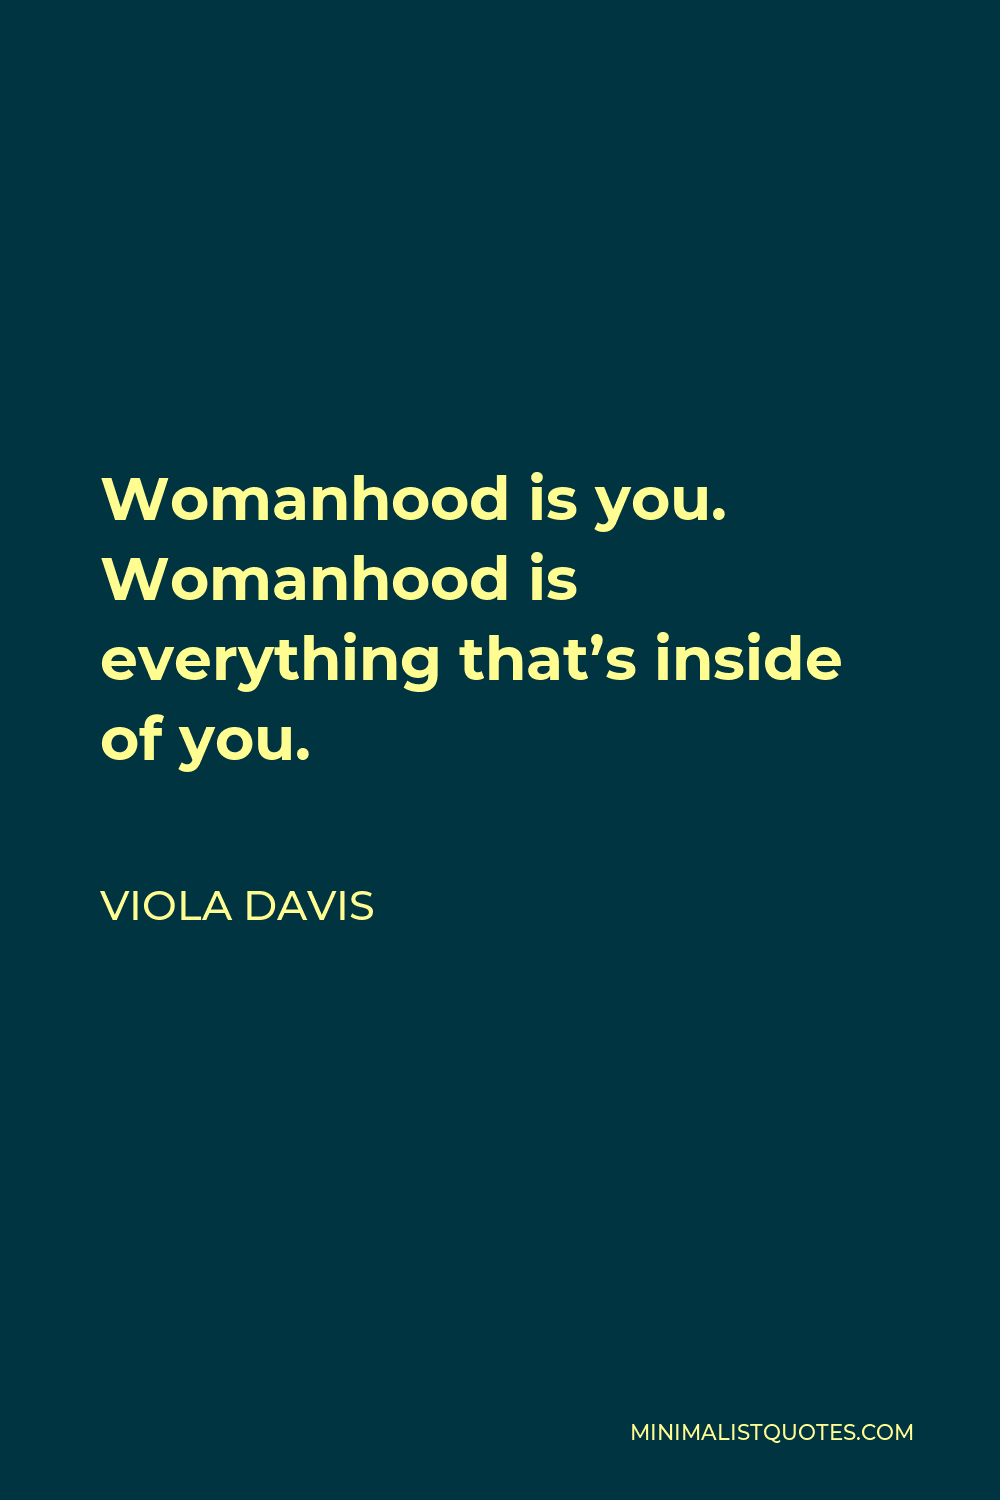 Viola Davis Quote - Womanhood is you. Womanhood is everything that’s inside of you.